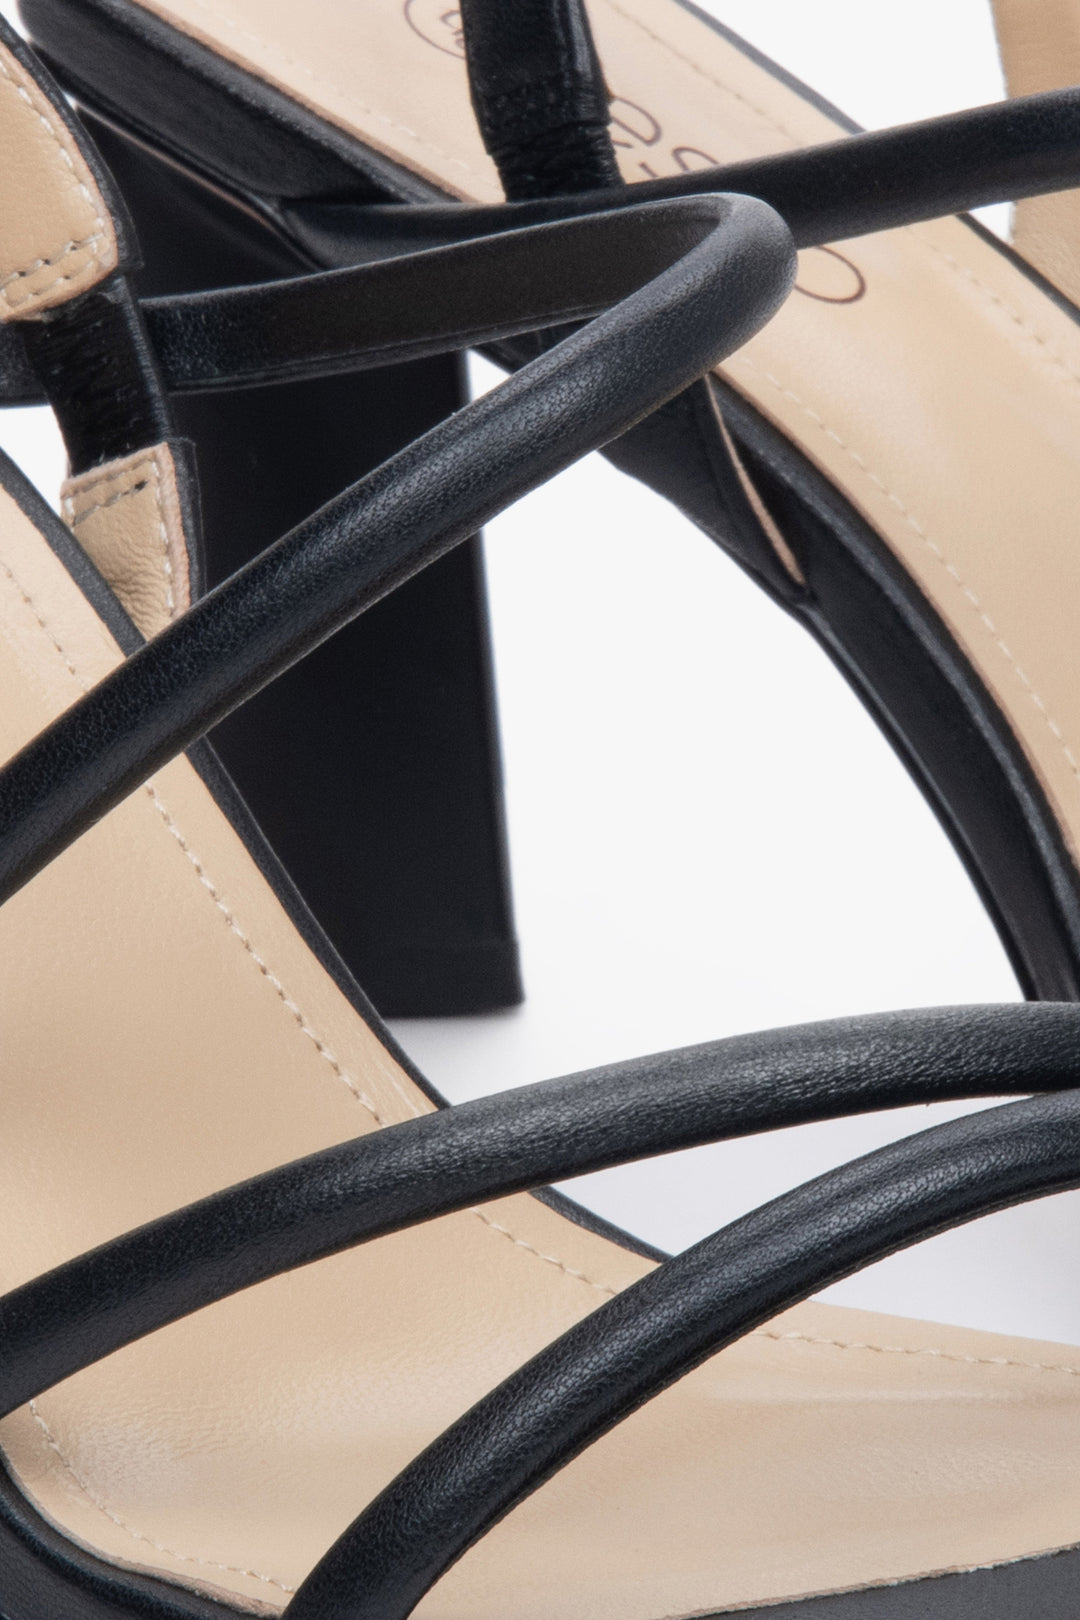 Strappy black women's sandals by Estro made of natural leather - a close up on details.